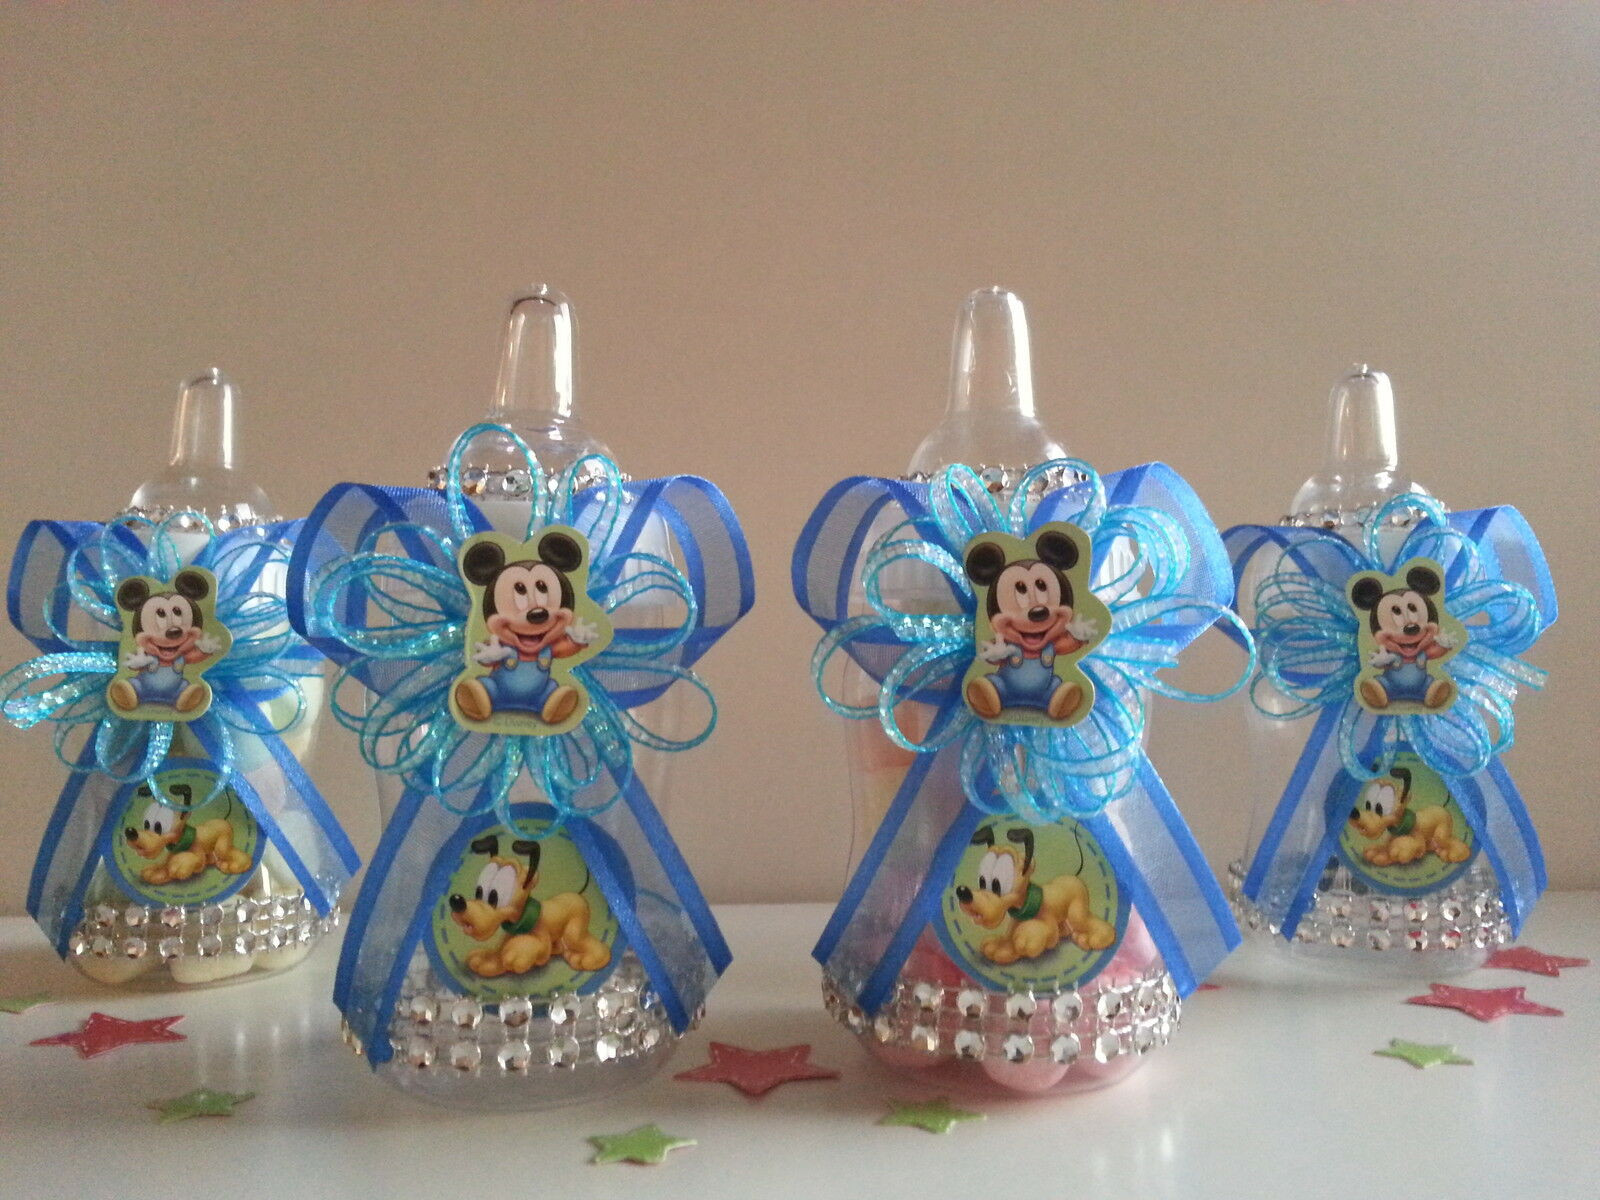 Baby Mickey Decoration Ideas
 12 Baby Mickey Mouse Fillable Bottles Baby Shower Favors